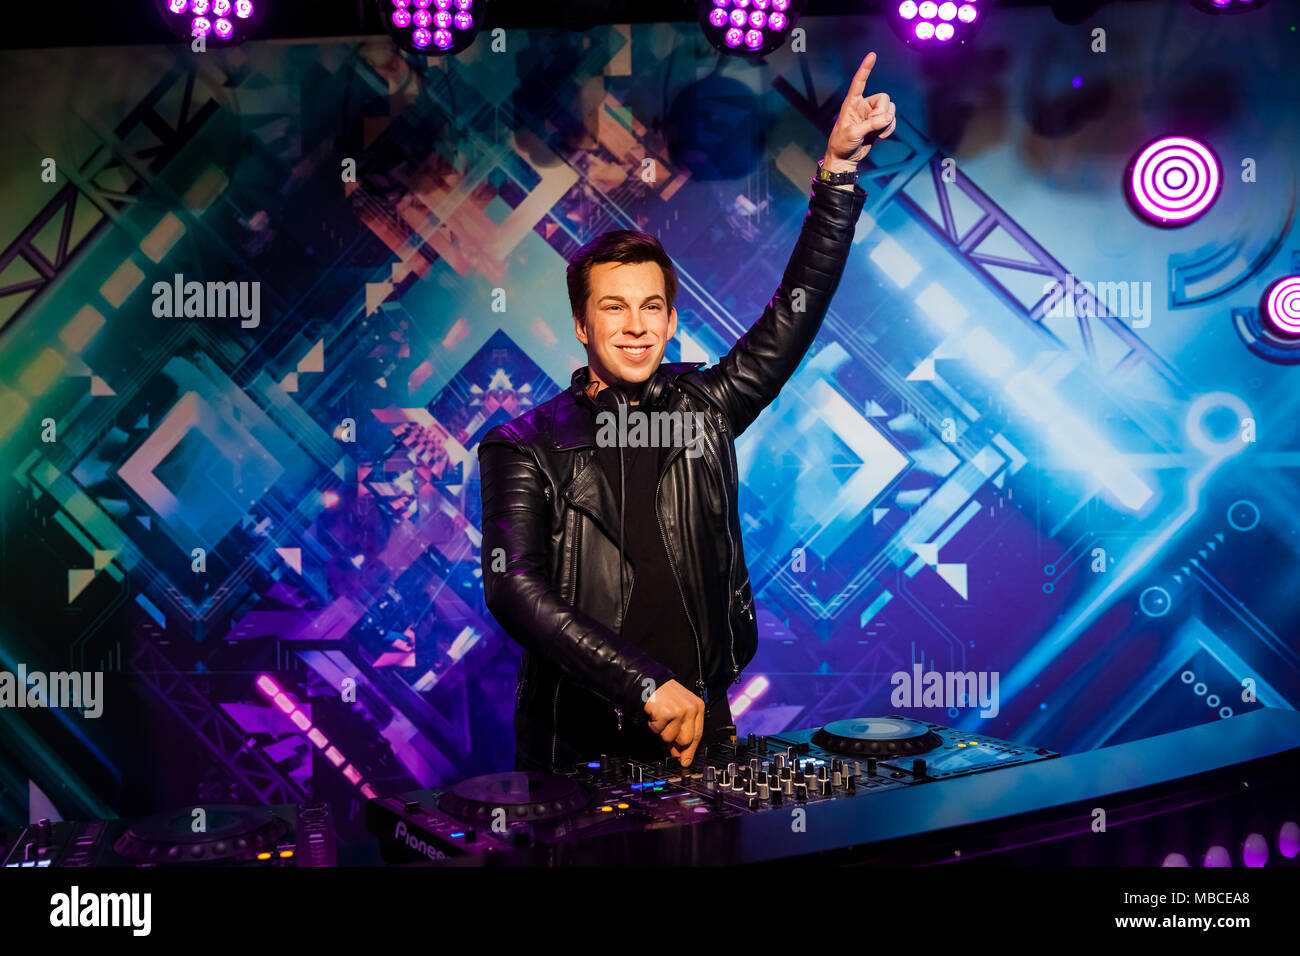 Amsterdam, Netherlands - March, 2017: Wax figure of Dutch DJ, record producer and remixer Robbert van de Corput known as Hardwell in Madame Tussauds Wax museum in Amsterdam, Netherlands Stock Photo